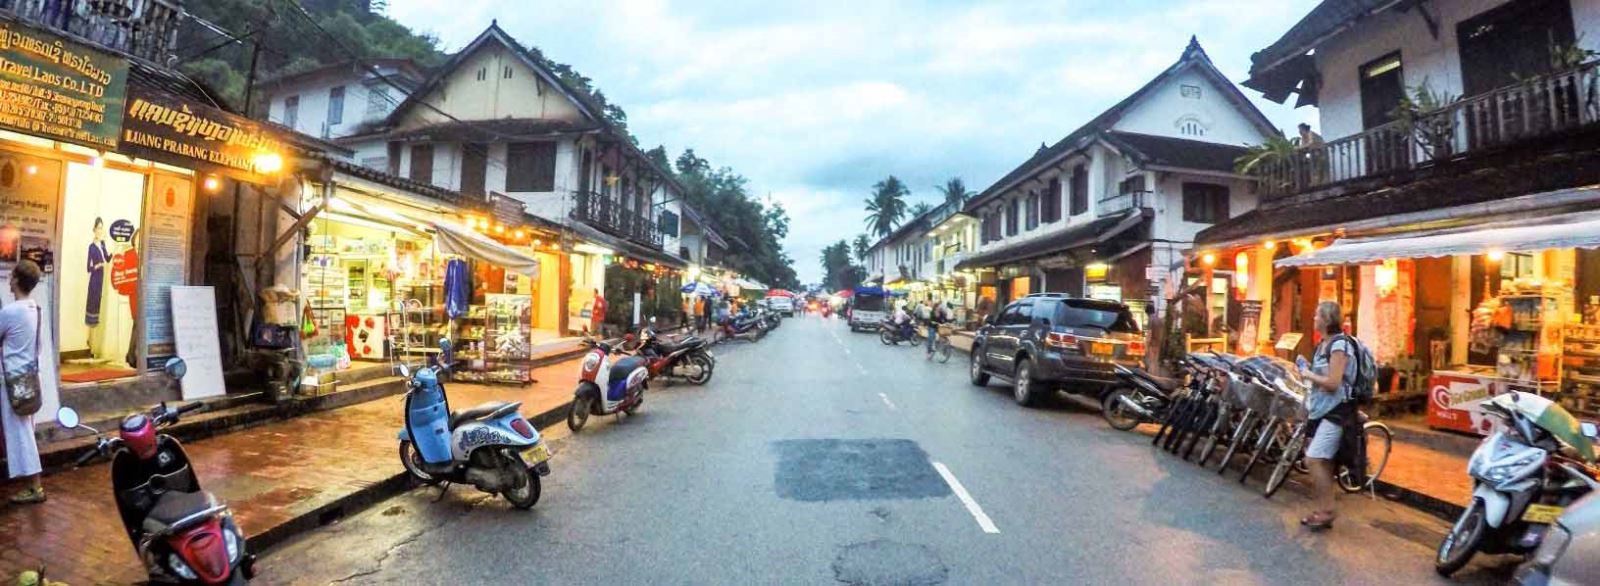 1. Strolling through the picturesque streets in Luang Prabang